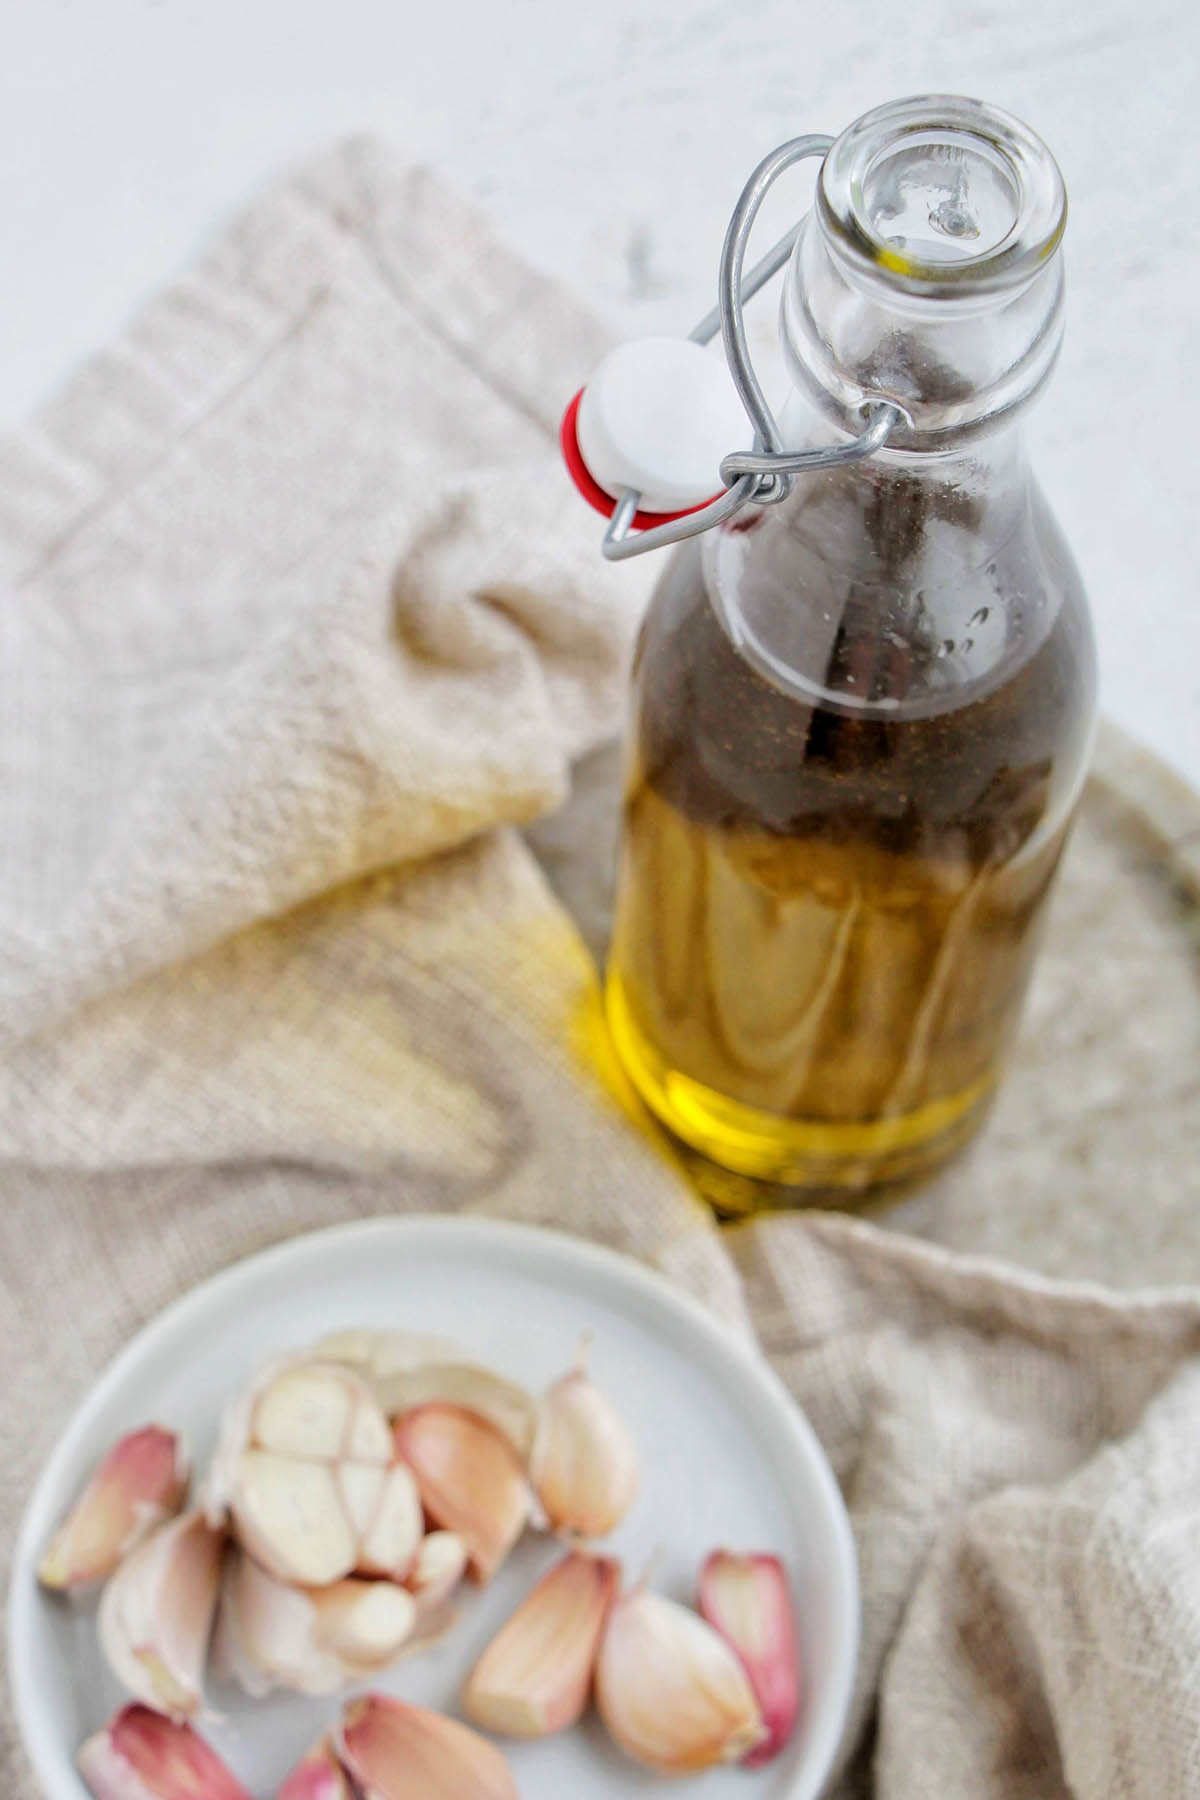 garlic infused olive oil in a glass jar next to a plate of garlic cloves.